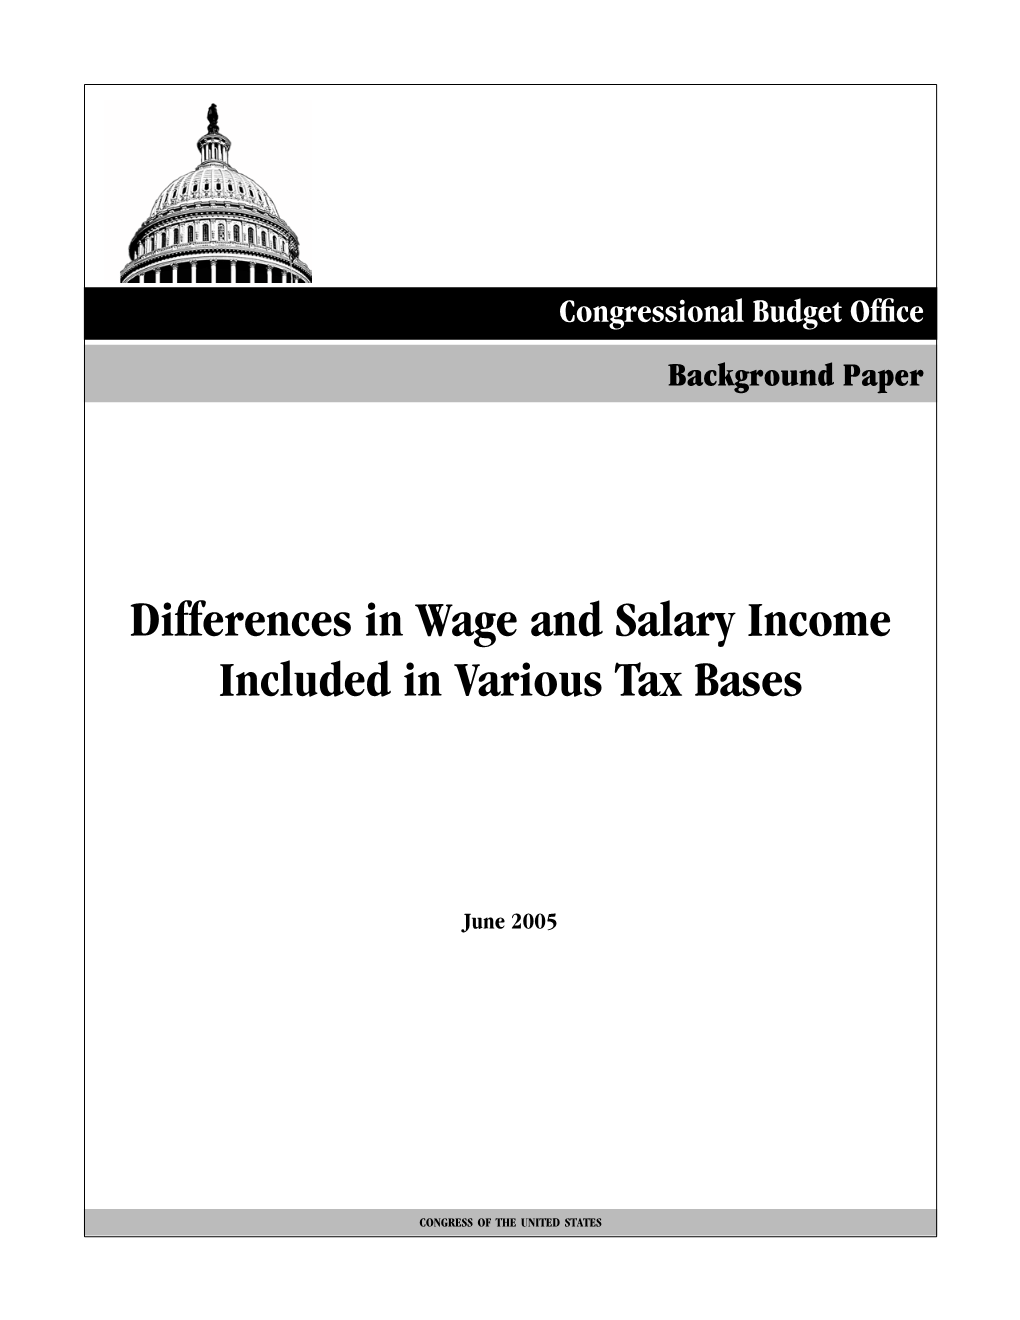 Differences in Wage and Salary Income Included in Various Tax Bases